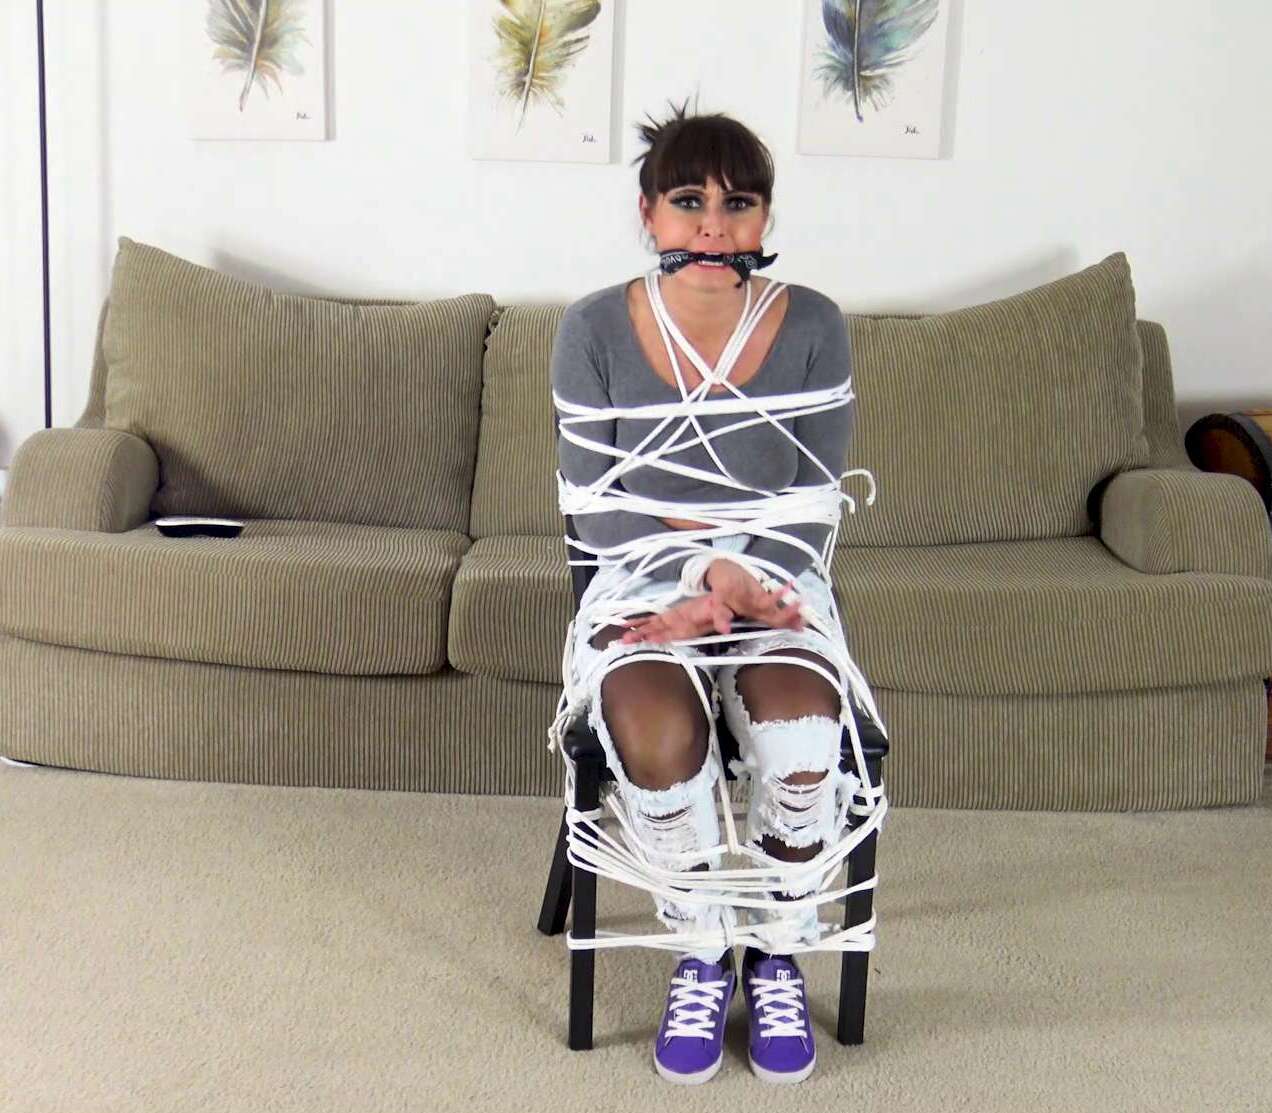 Rope Bondage - Lil Miz Unique - Cool Aunt Bound and Gagged - Cinched and Secured